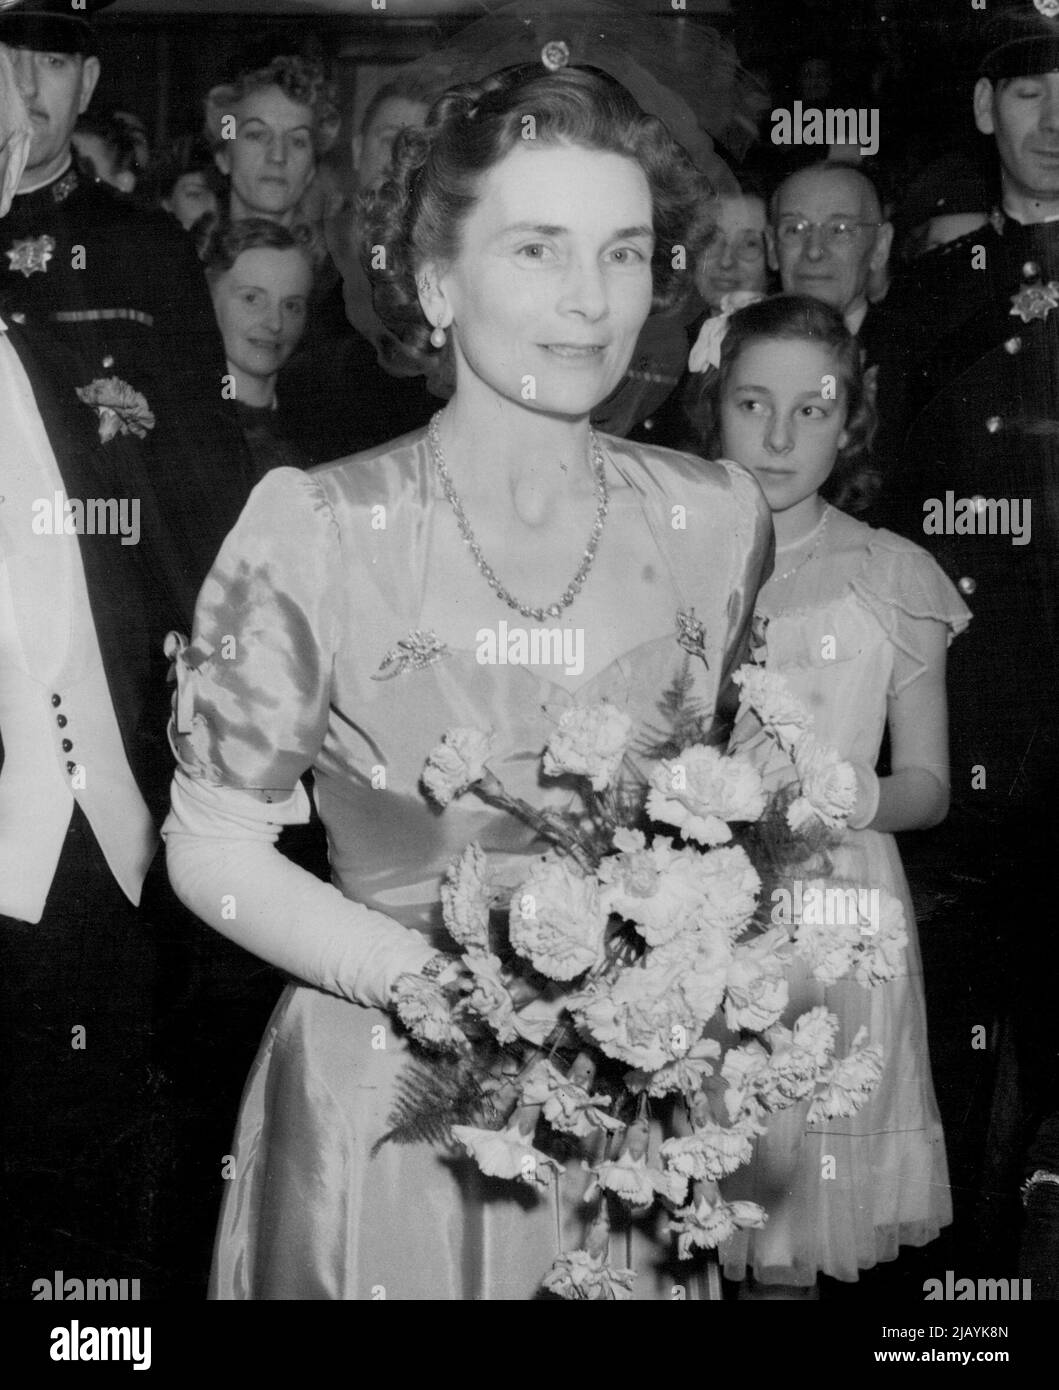 Duchess of Gloucester Attends Film Premiere -- H.R.H. The Duchess of Gloucester, wearing a pink evening gown arriving at the Warner Theatre, London, this evening (Thursday) to attend the film premiere of The Voice of the Turtle' Which features Ronald Reagan and Eleanor Parker. Proceeds are being devoted to the British Empire Cancer Campaign. November 18, 1948. (Photo by Reuterphoto) Stock Photo